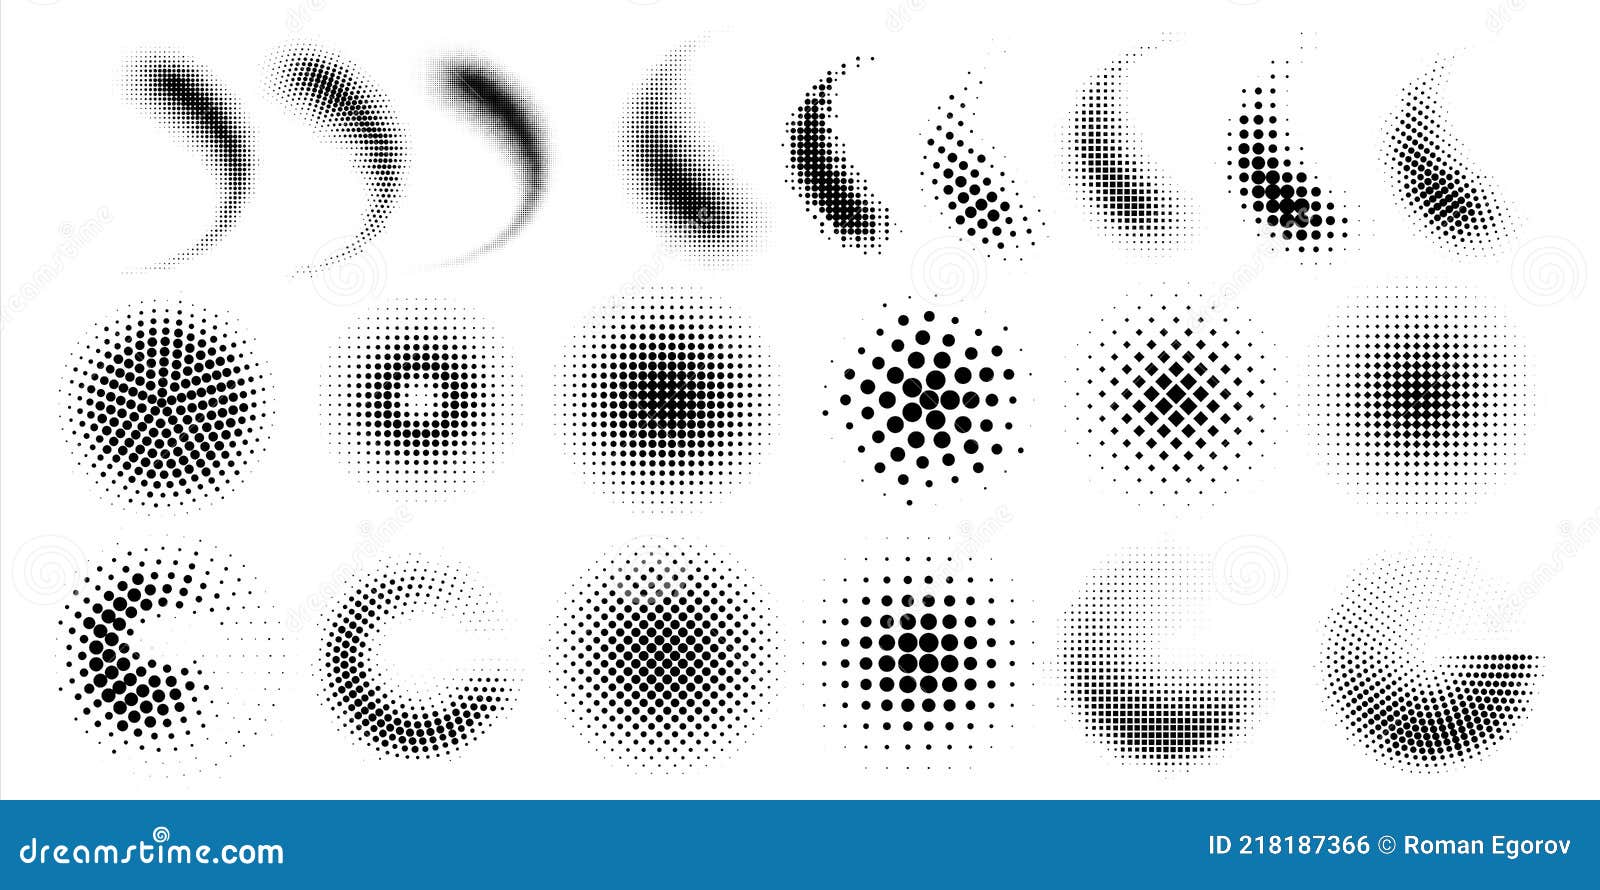 halftone gradient spray. dots and circles half tone graphic s. black points round s or curved smears. comic